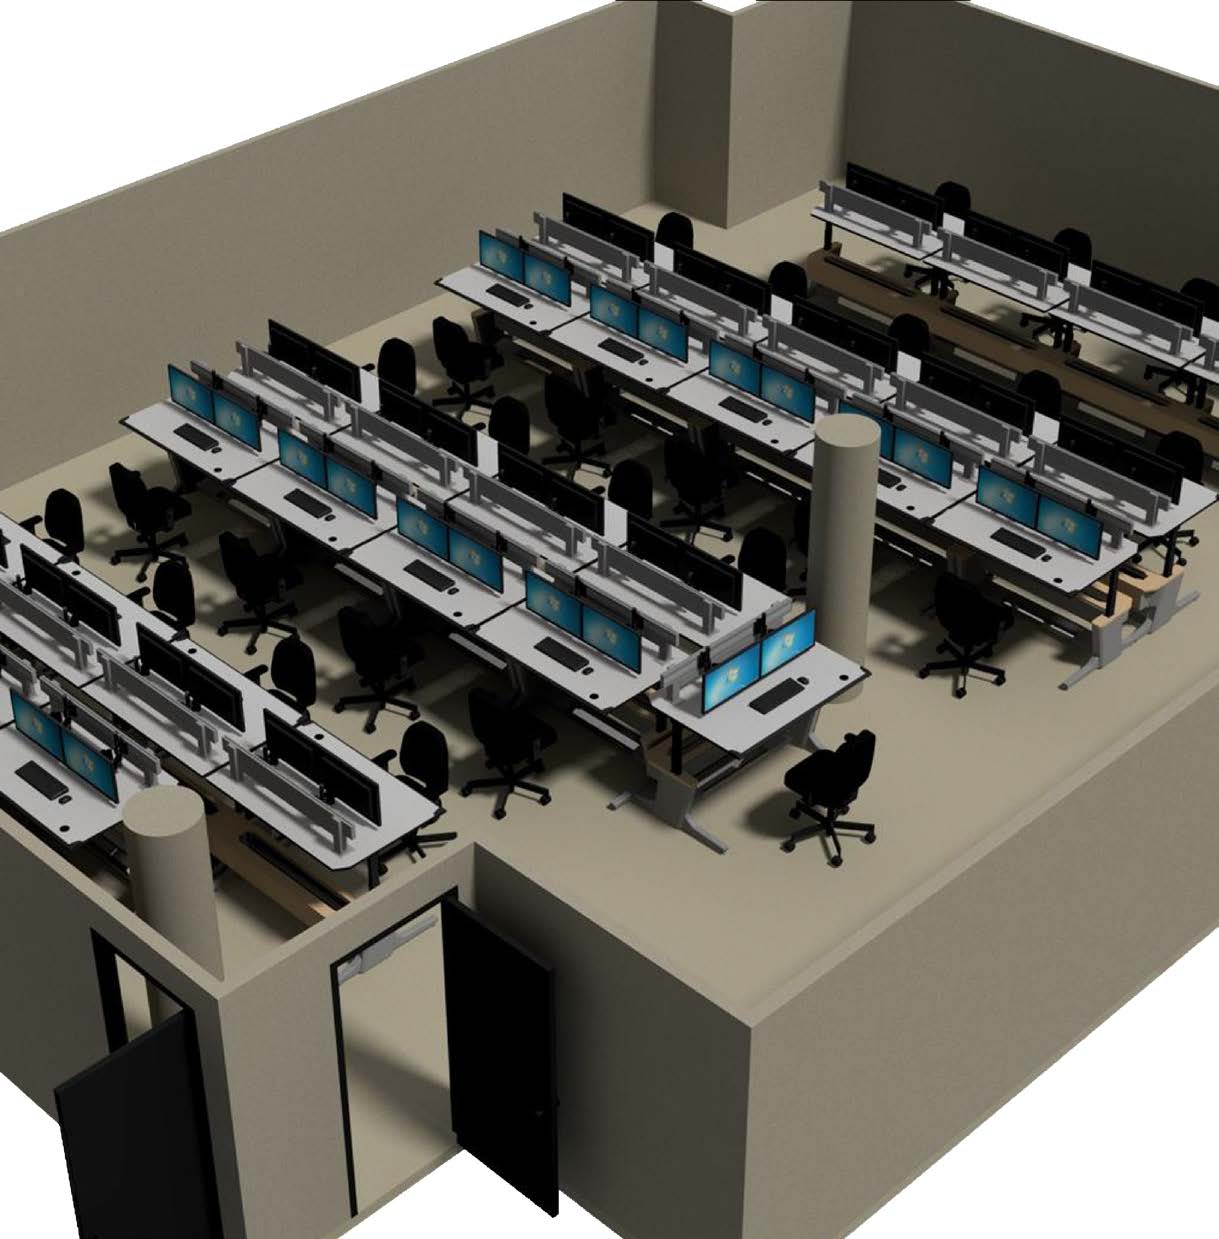 A computer rendering of the Agency Synchronization Operation Center with rows of computer desks in a room